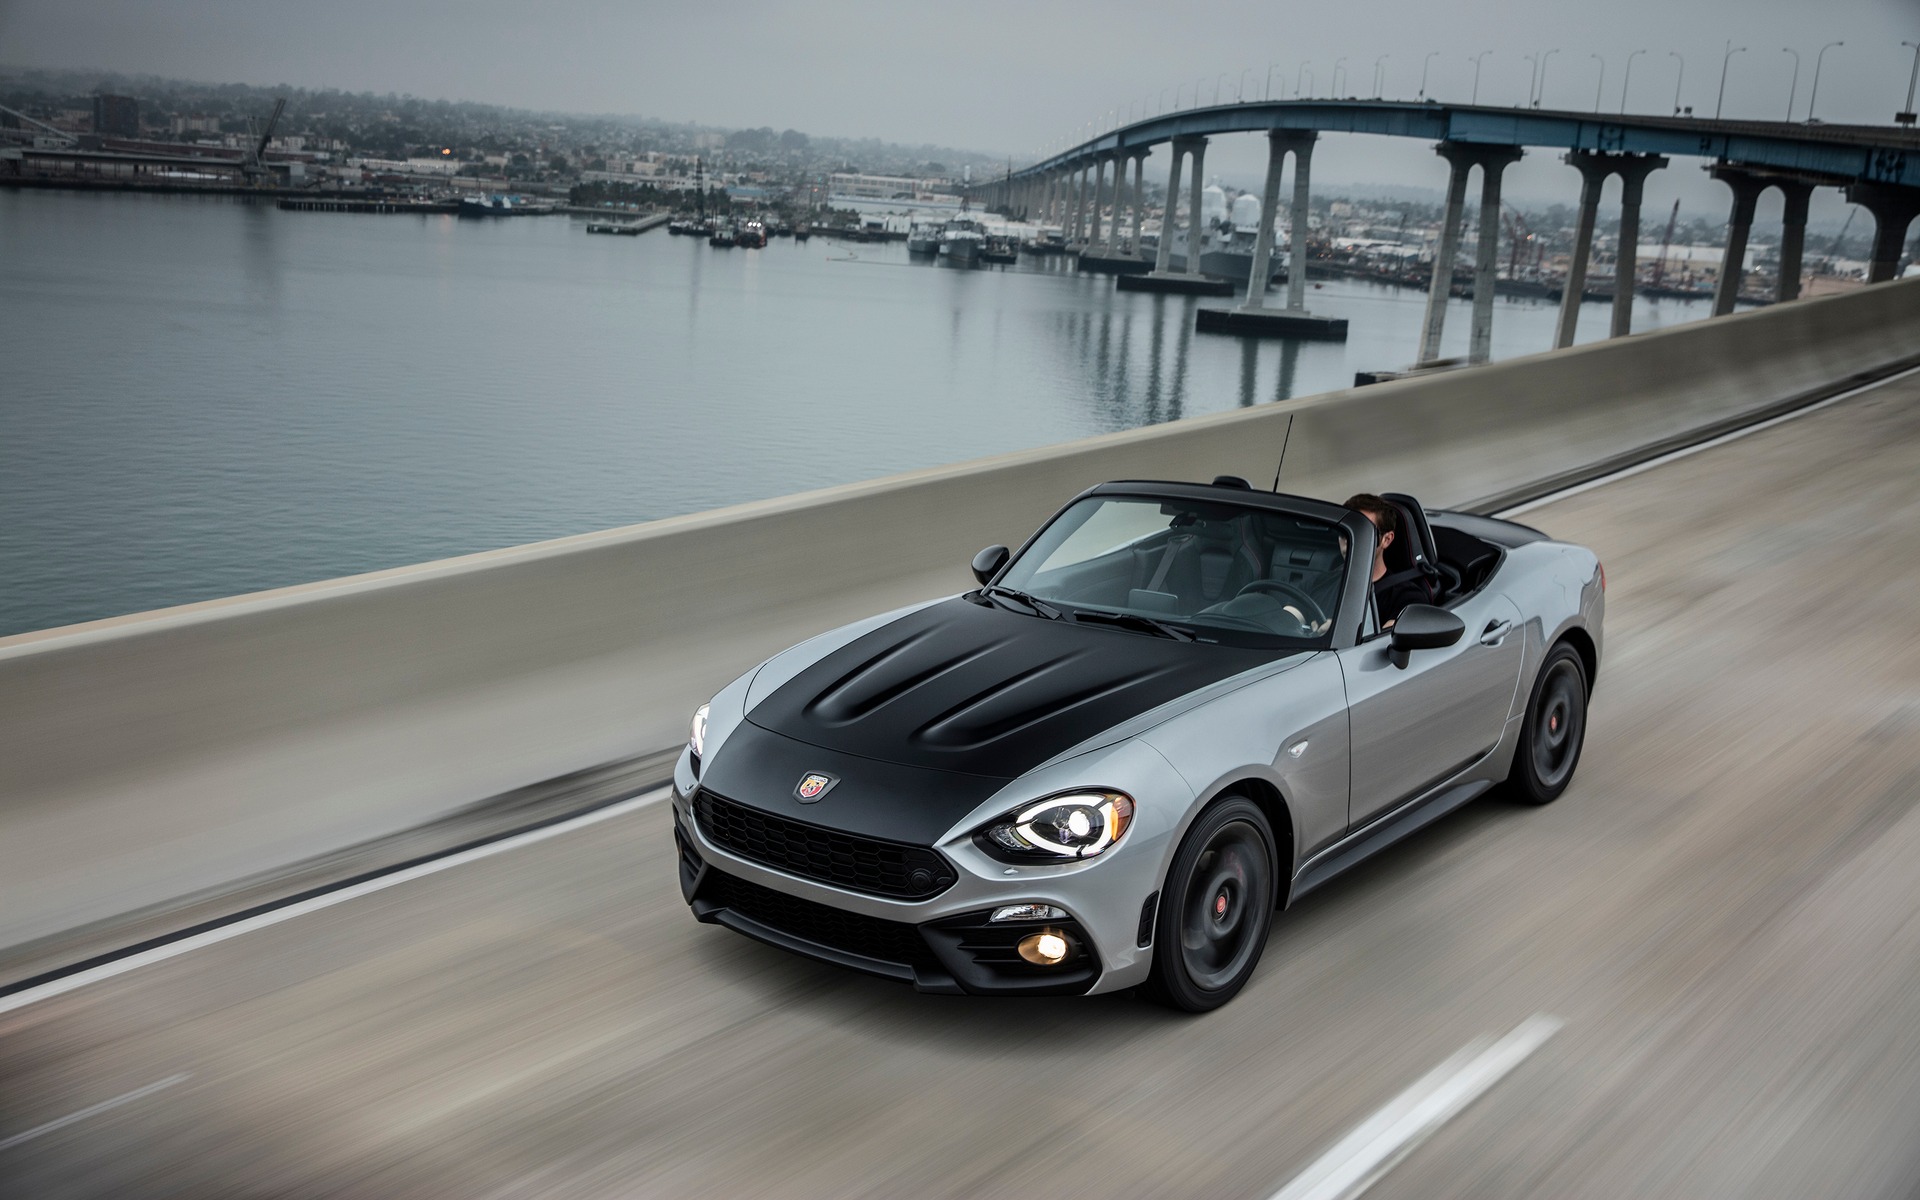 18 Fiat 124 Spider News Reviews Picture Galleries And Videos The Car Guide